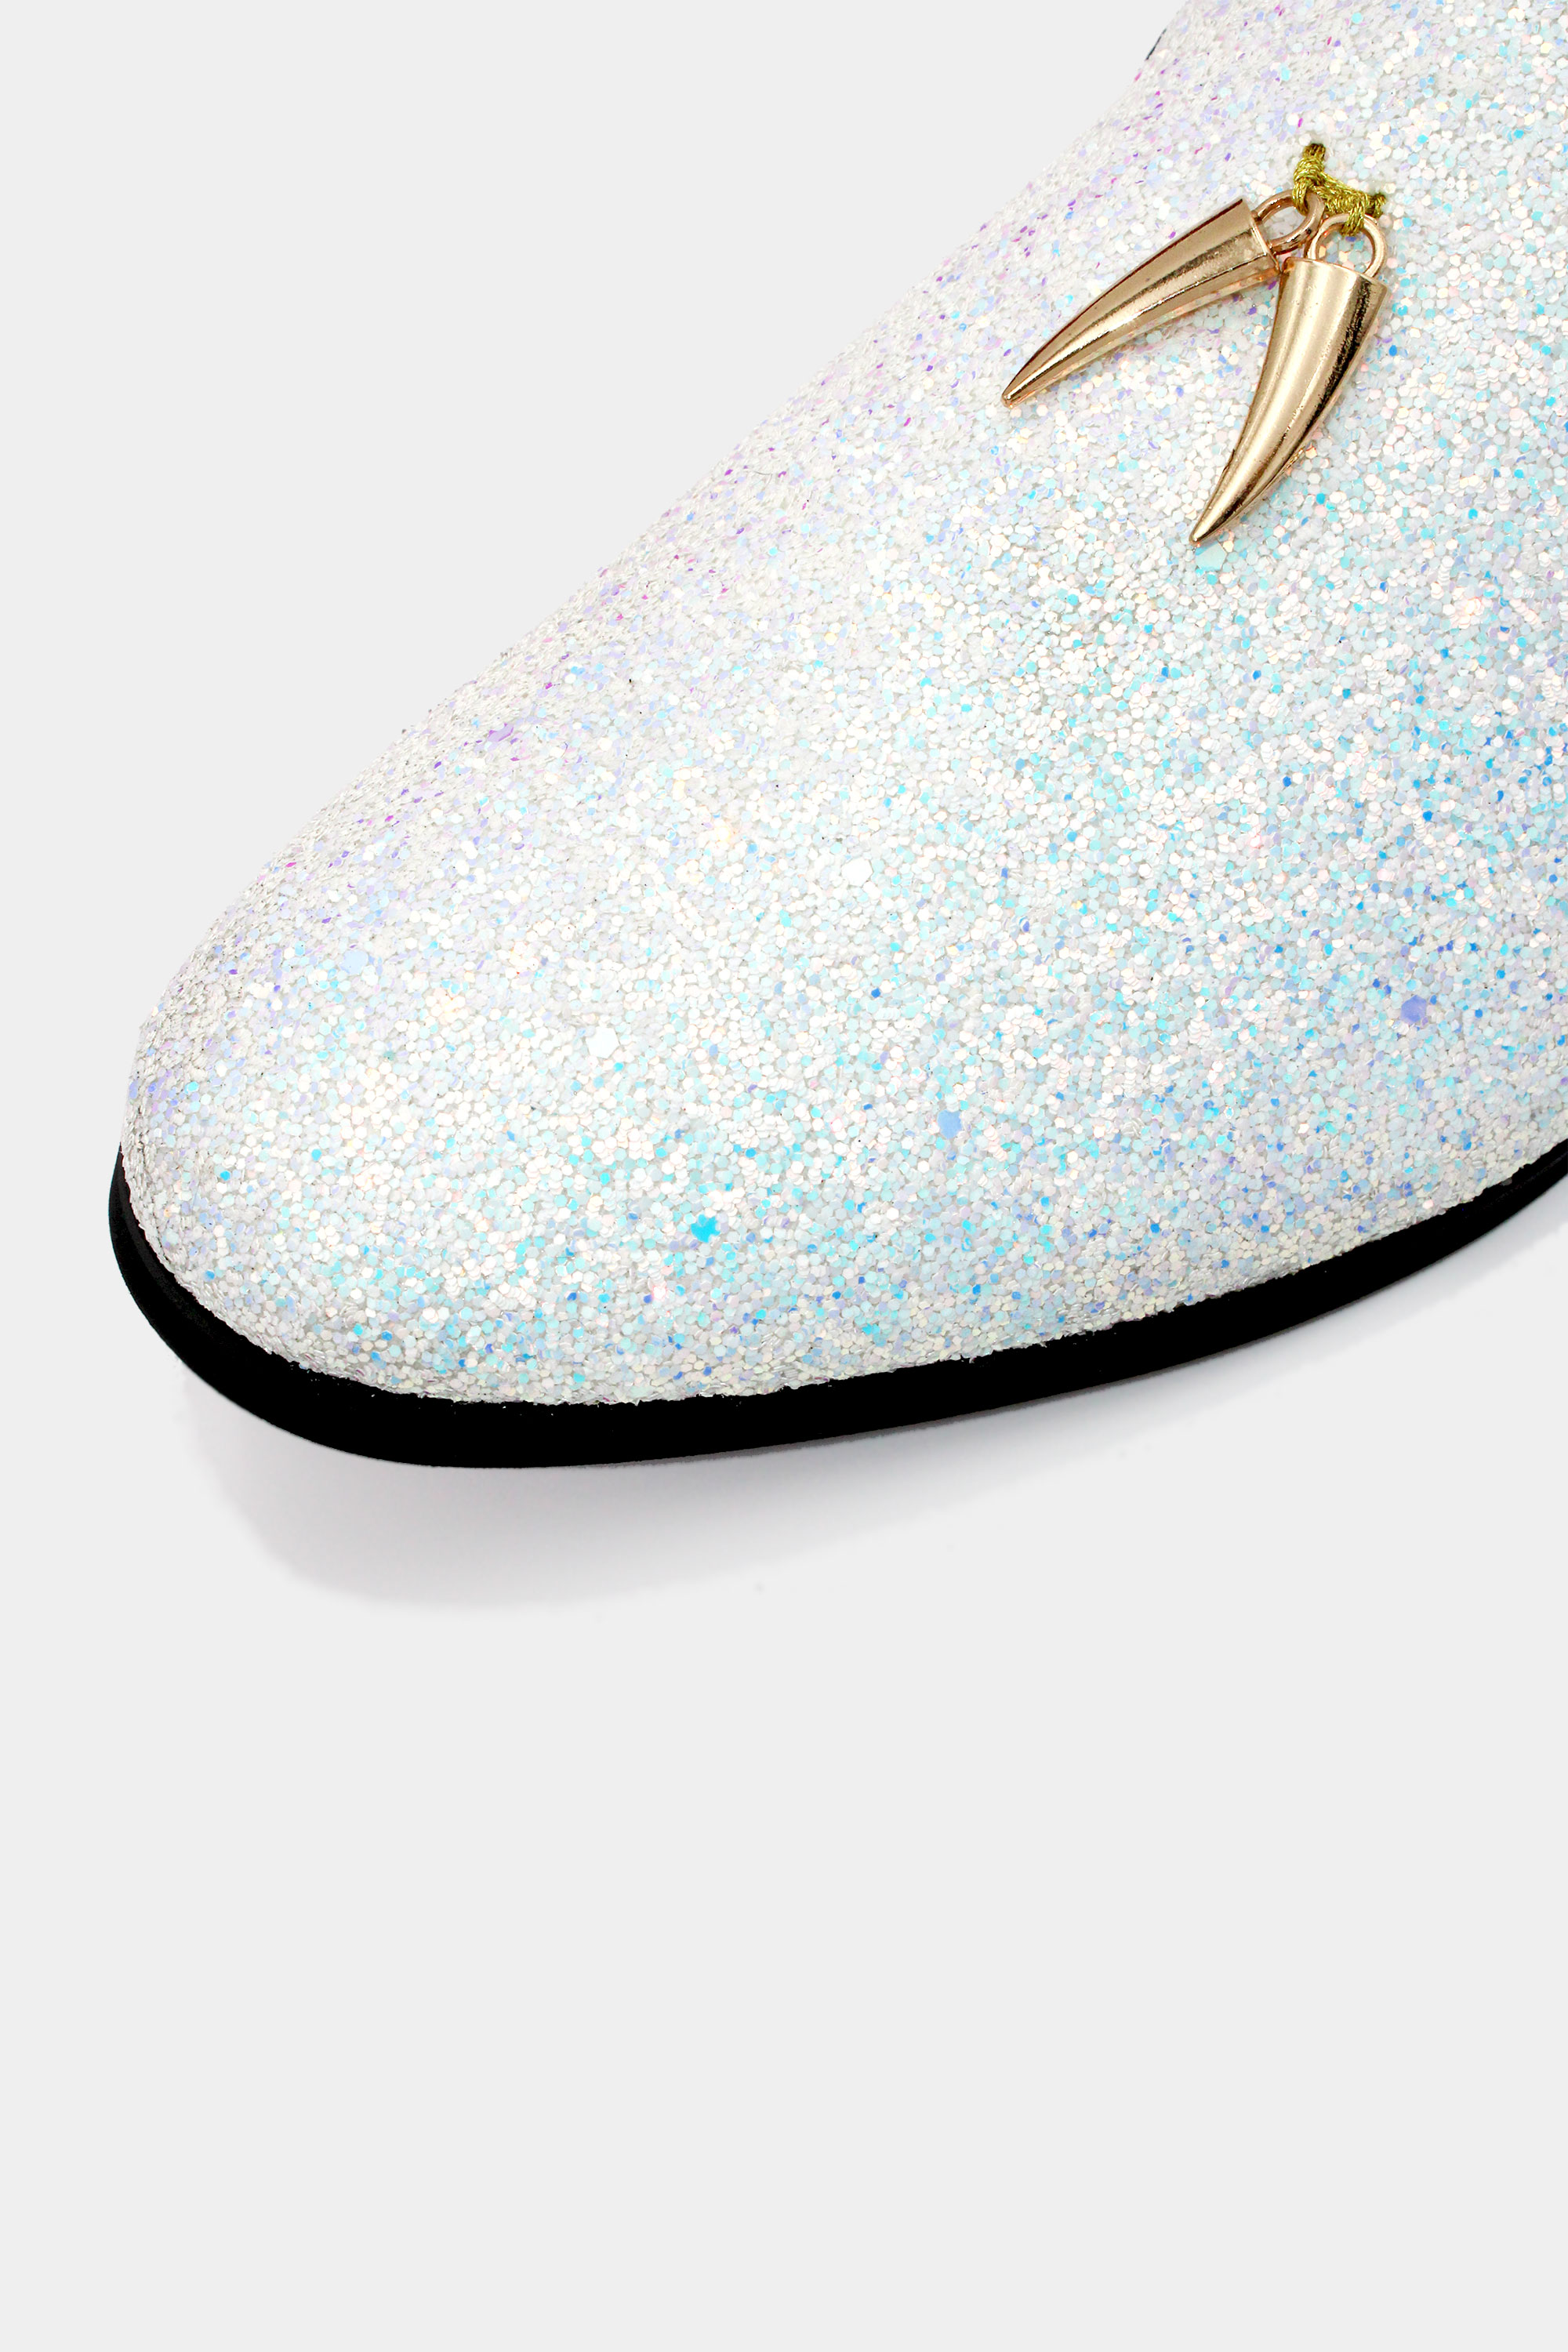 White-Sparkly-Loafers-Shoes-from-Gentlemansguru.com